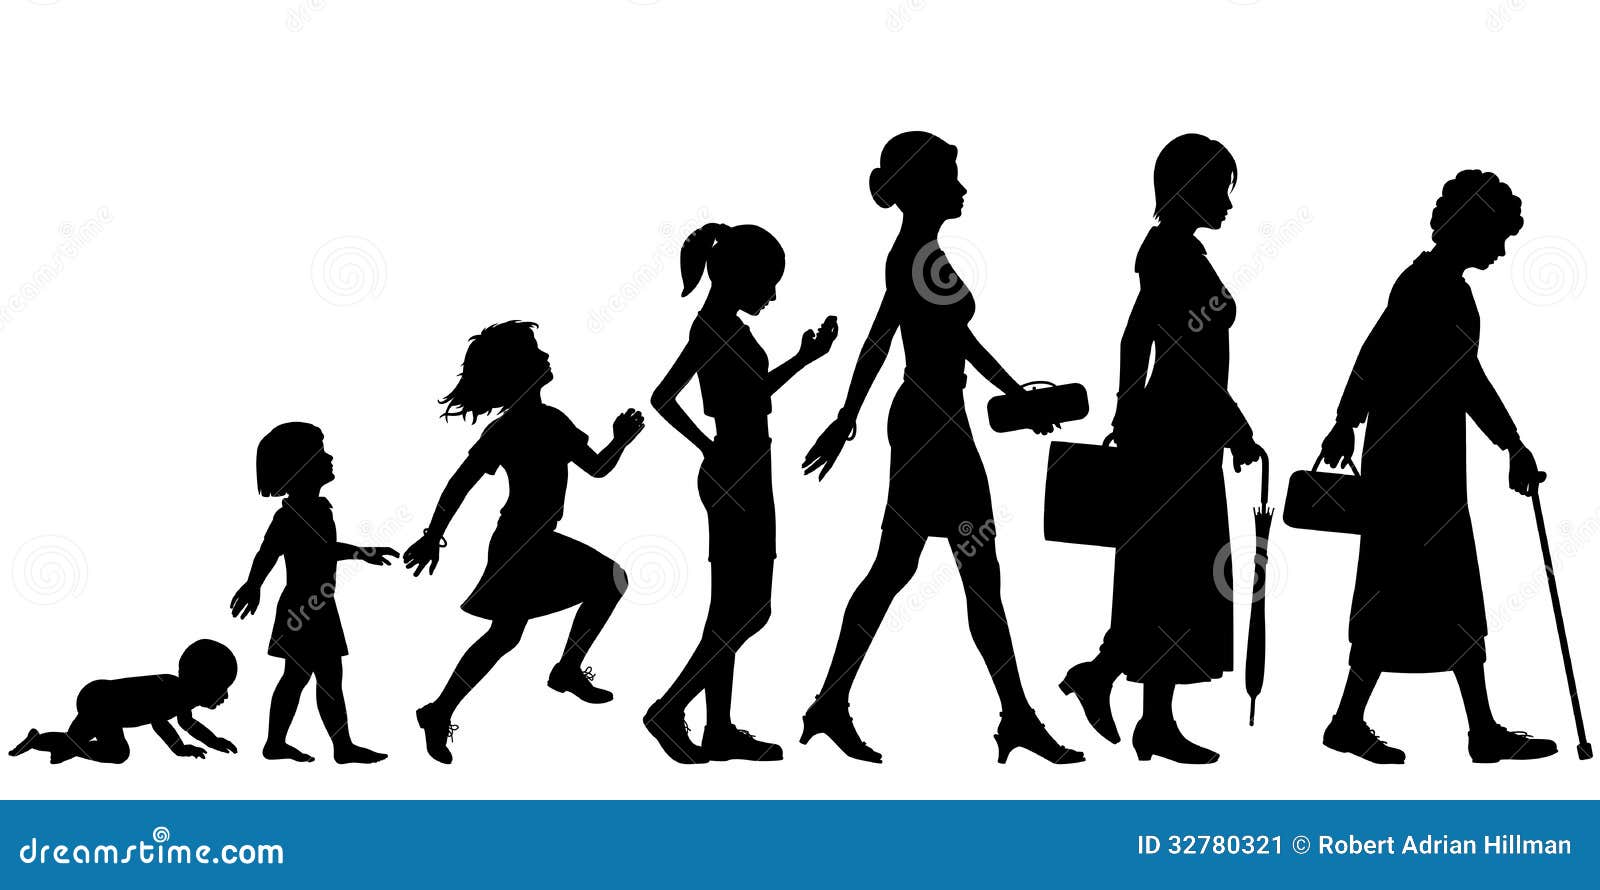 http://thumbs.dreamstime.com/z/ages-woman-editable-vector-silhouettes-different-stages-womans-life-32780321.jpg